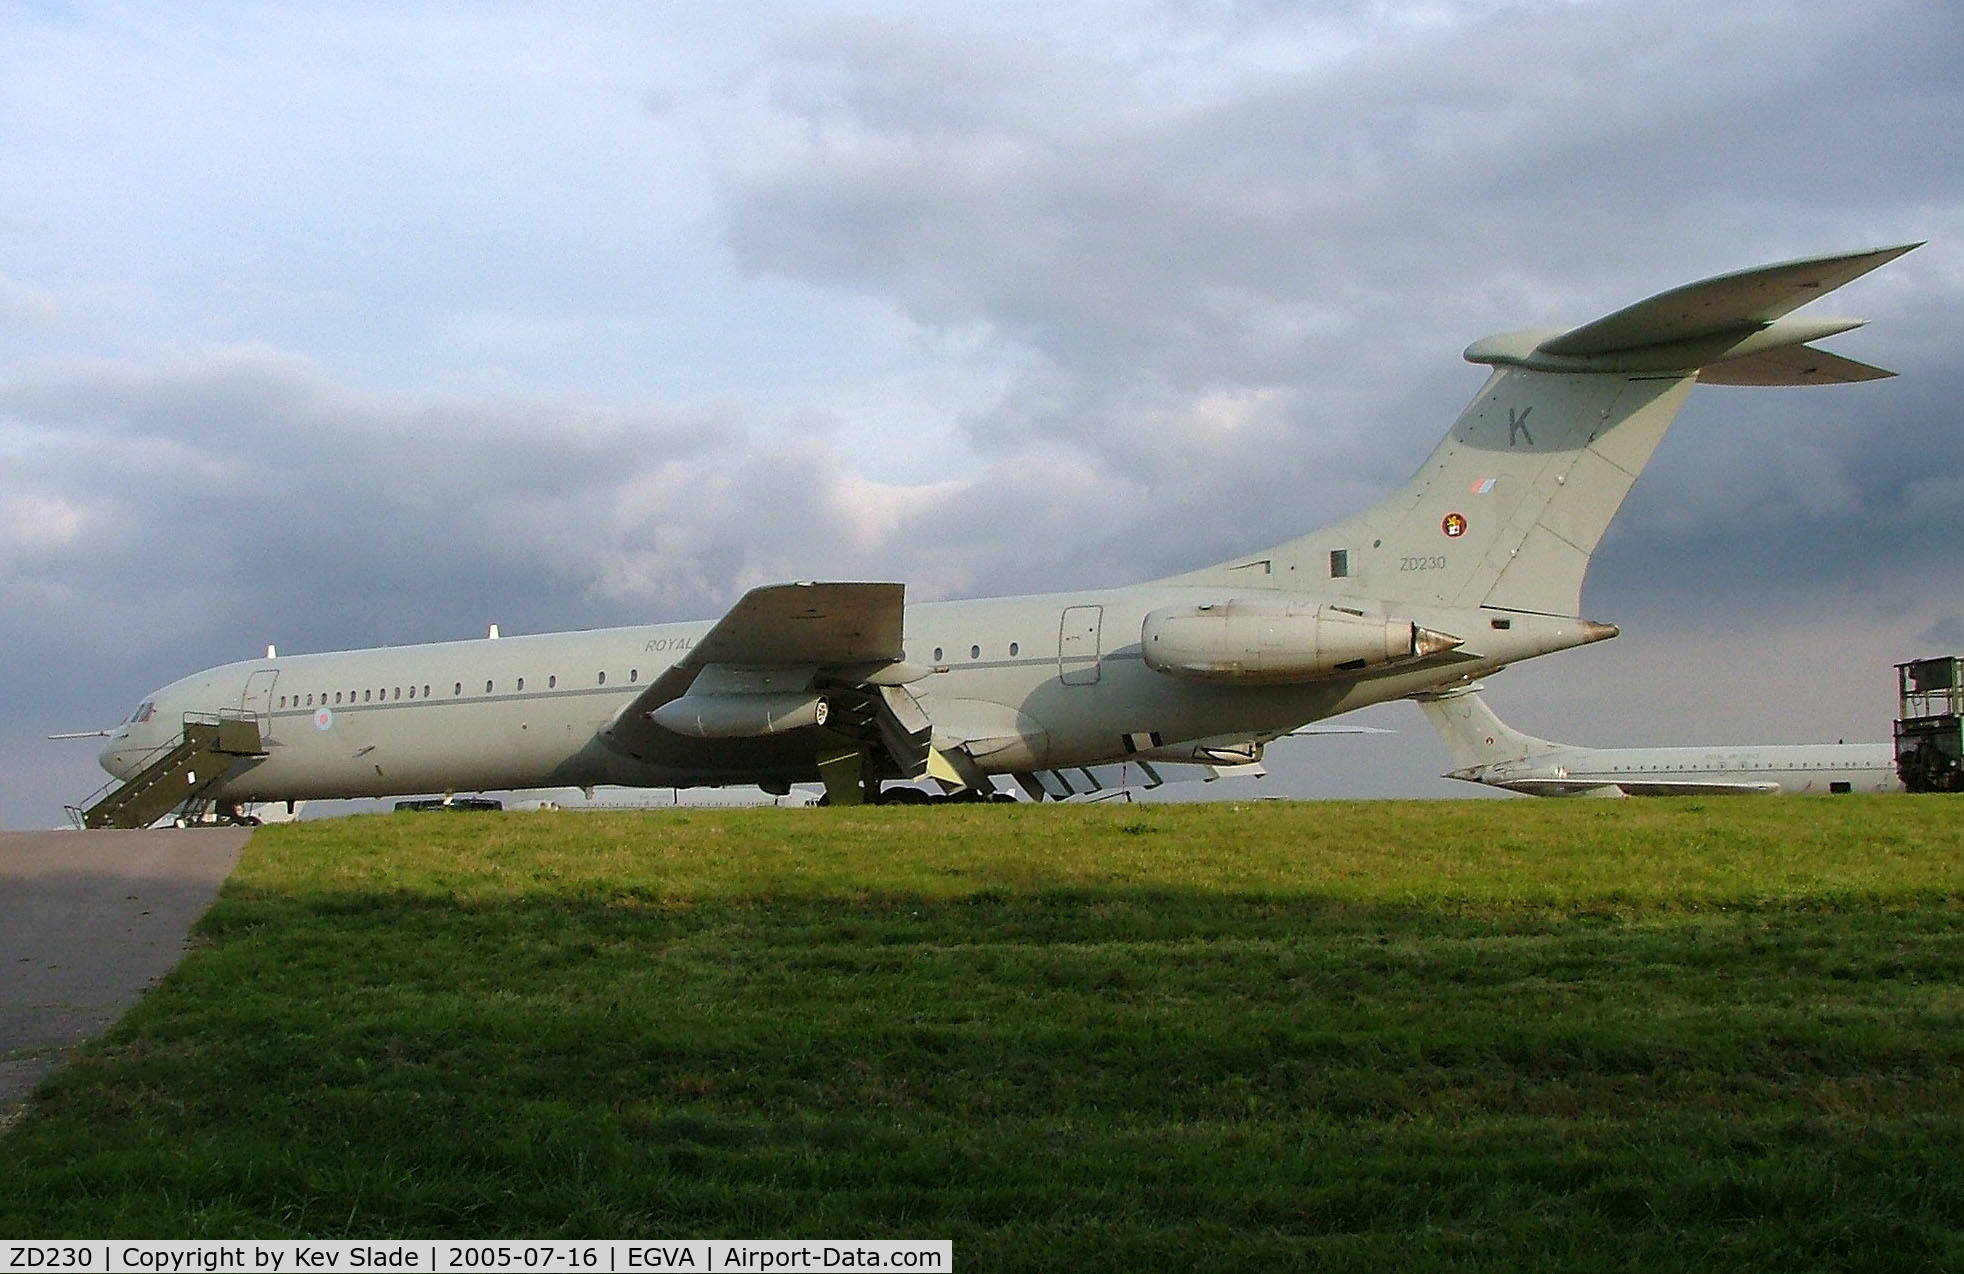 ZD230, 1964 BAC Super VC10 K.4 C/N 851, Operating out of Fairford while work was being carried out at RAF Brize Norton.